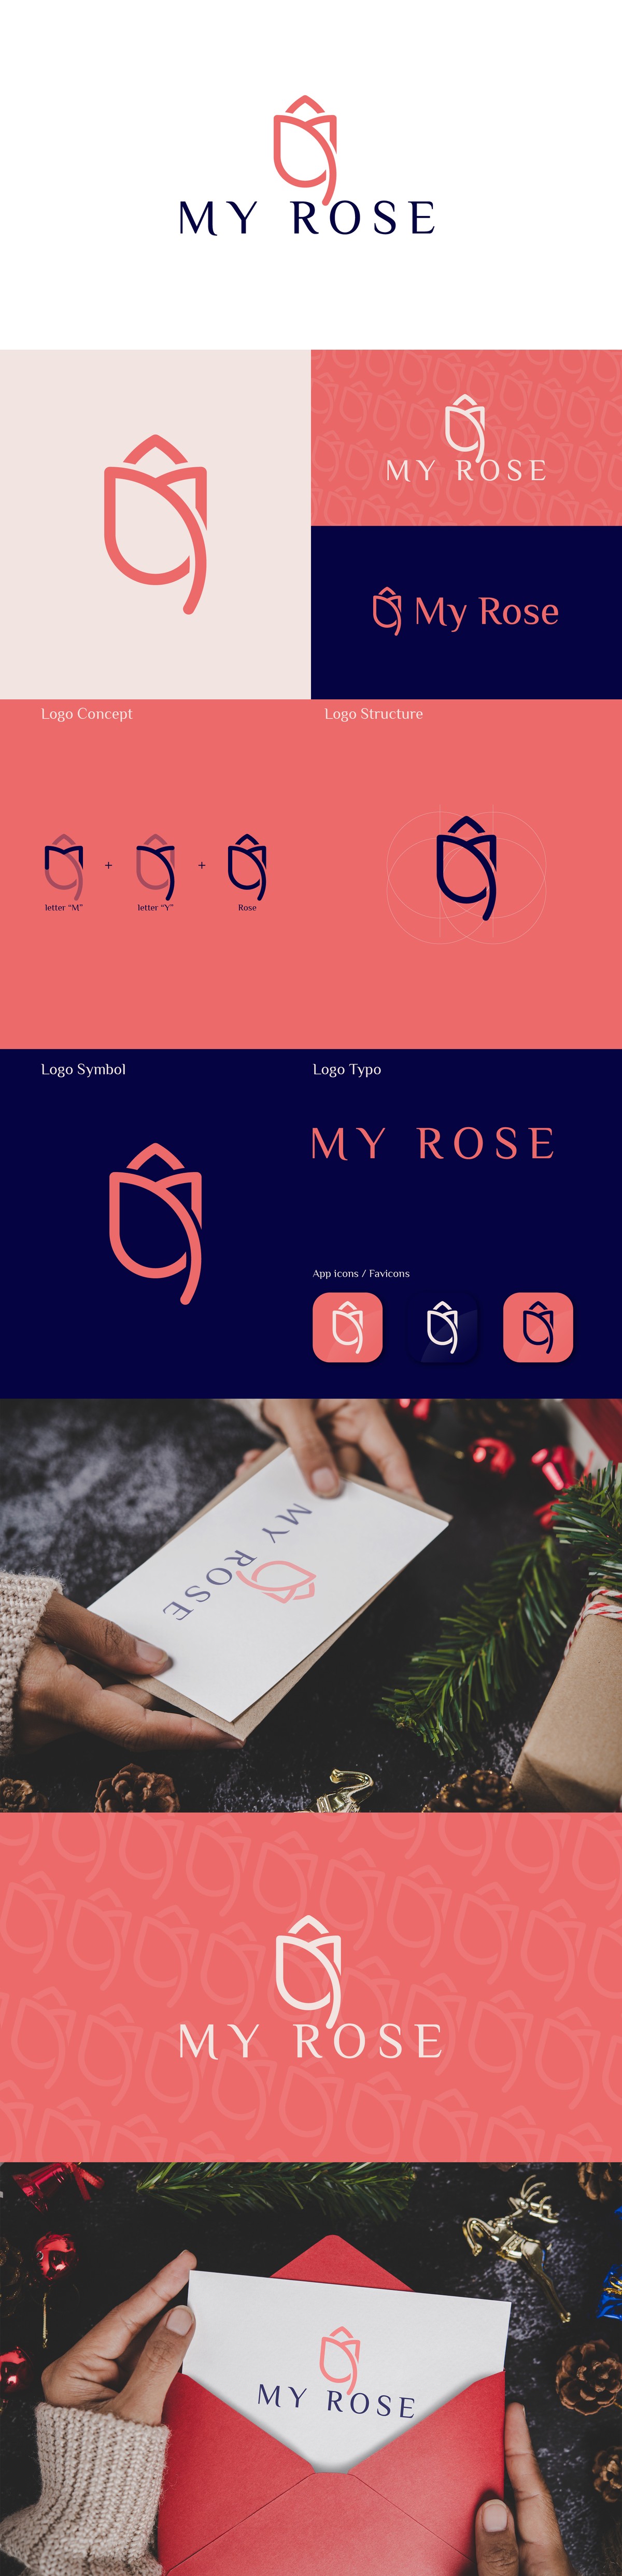 MY_ROSE_Cosmetic___Flowers___Gifts_Logo_Brand_Stationary-02